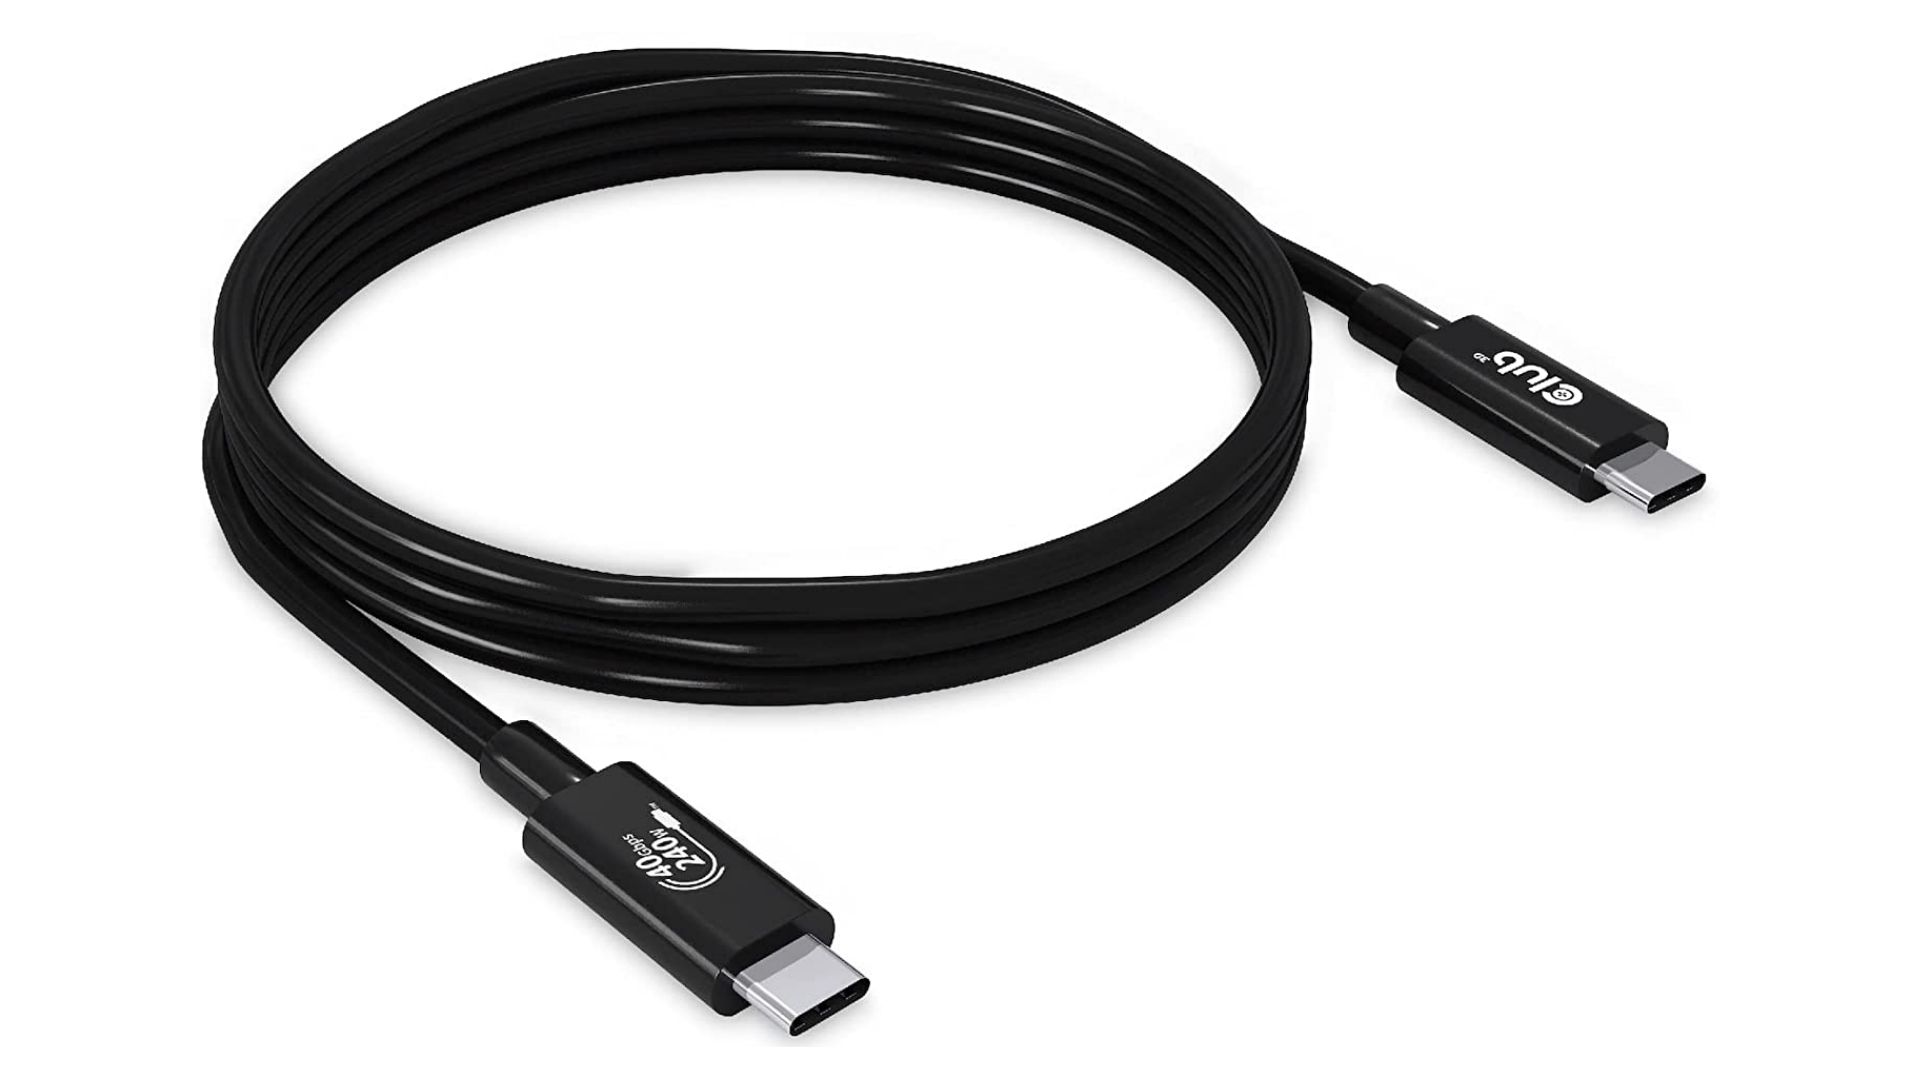 club 3d usb4 240w cable